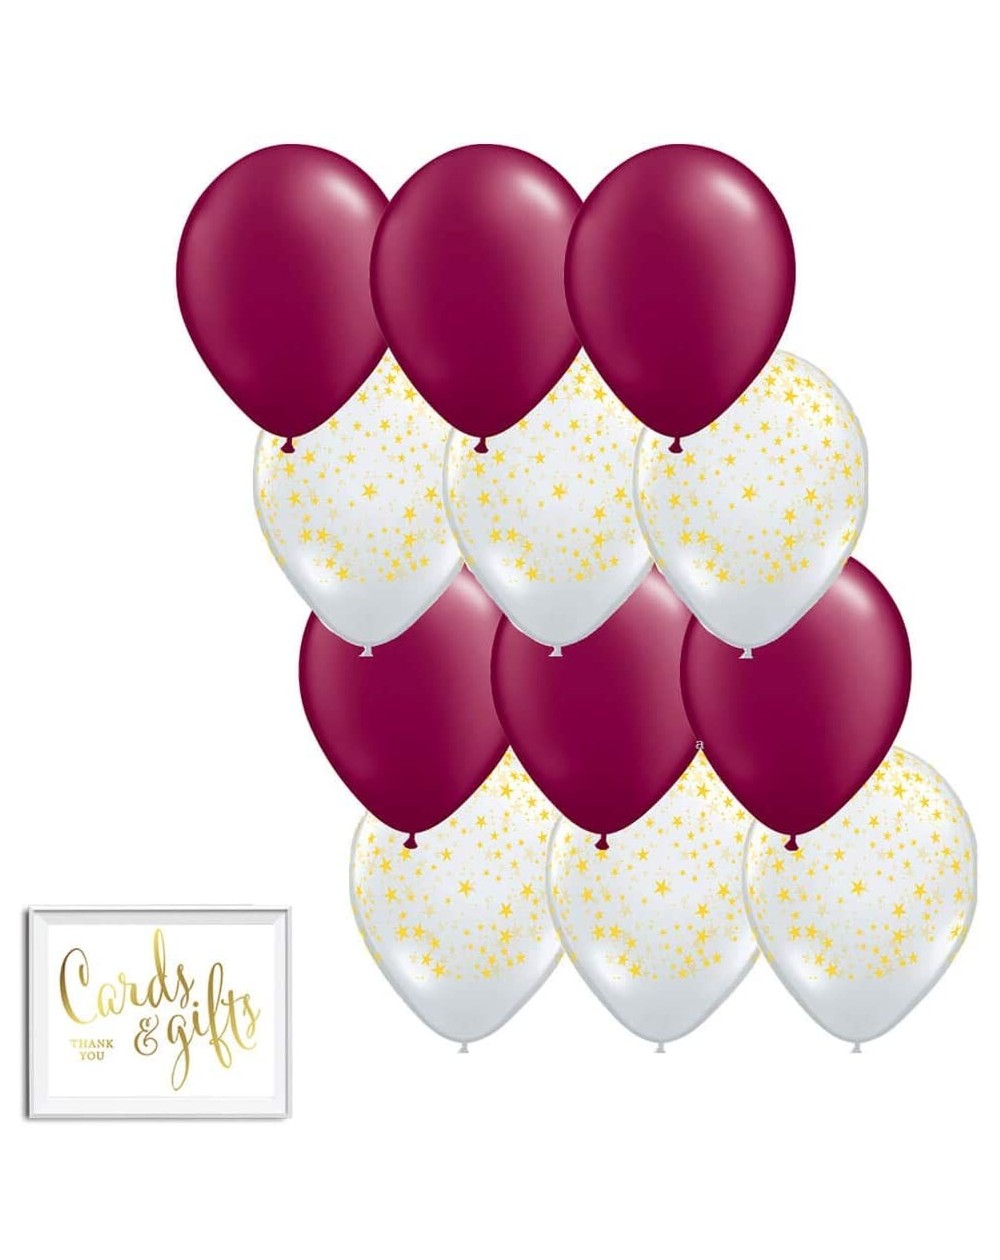 Balloons 11-inch Latex Balloon Duo Party Kit with Gold Cards & Gifts Sign- Burgundy and Clear with Gold Stars- 12-pk - Burgun...